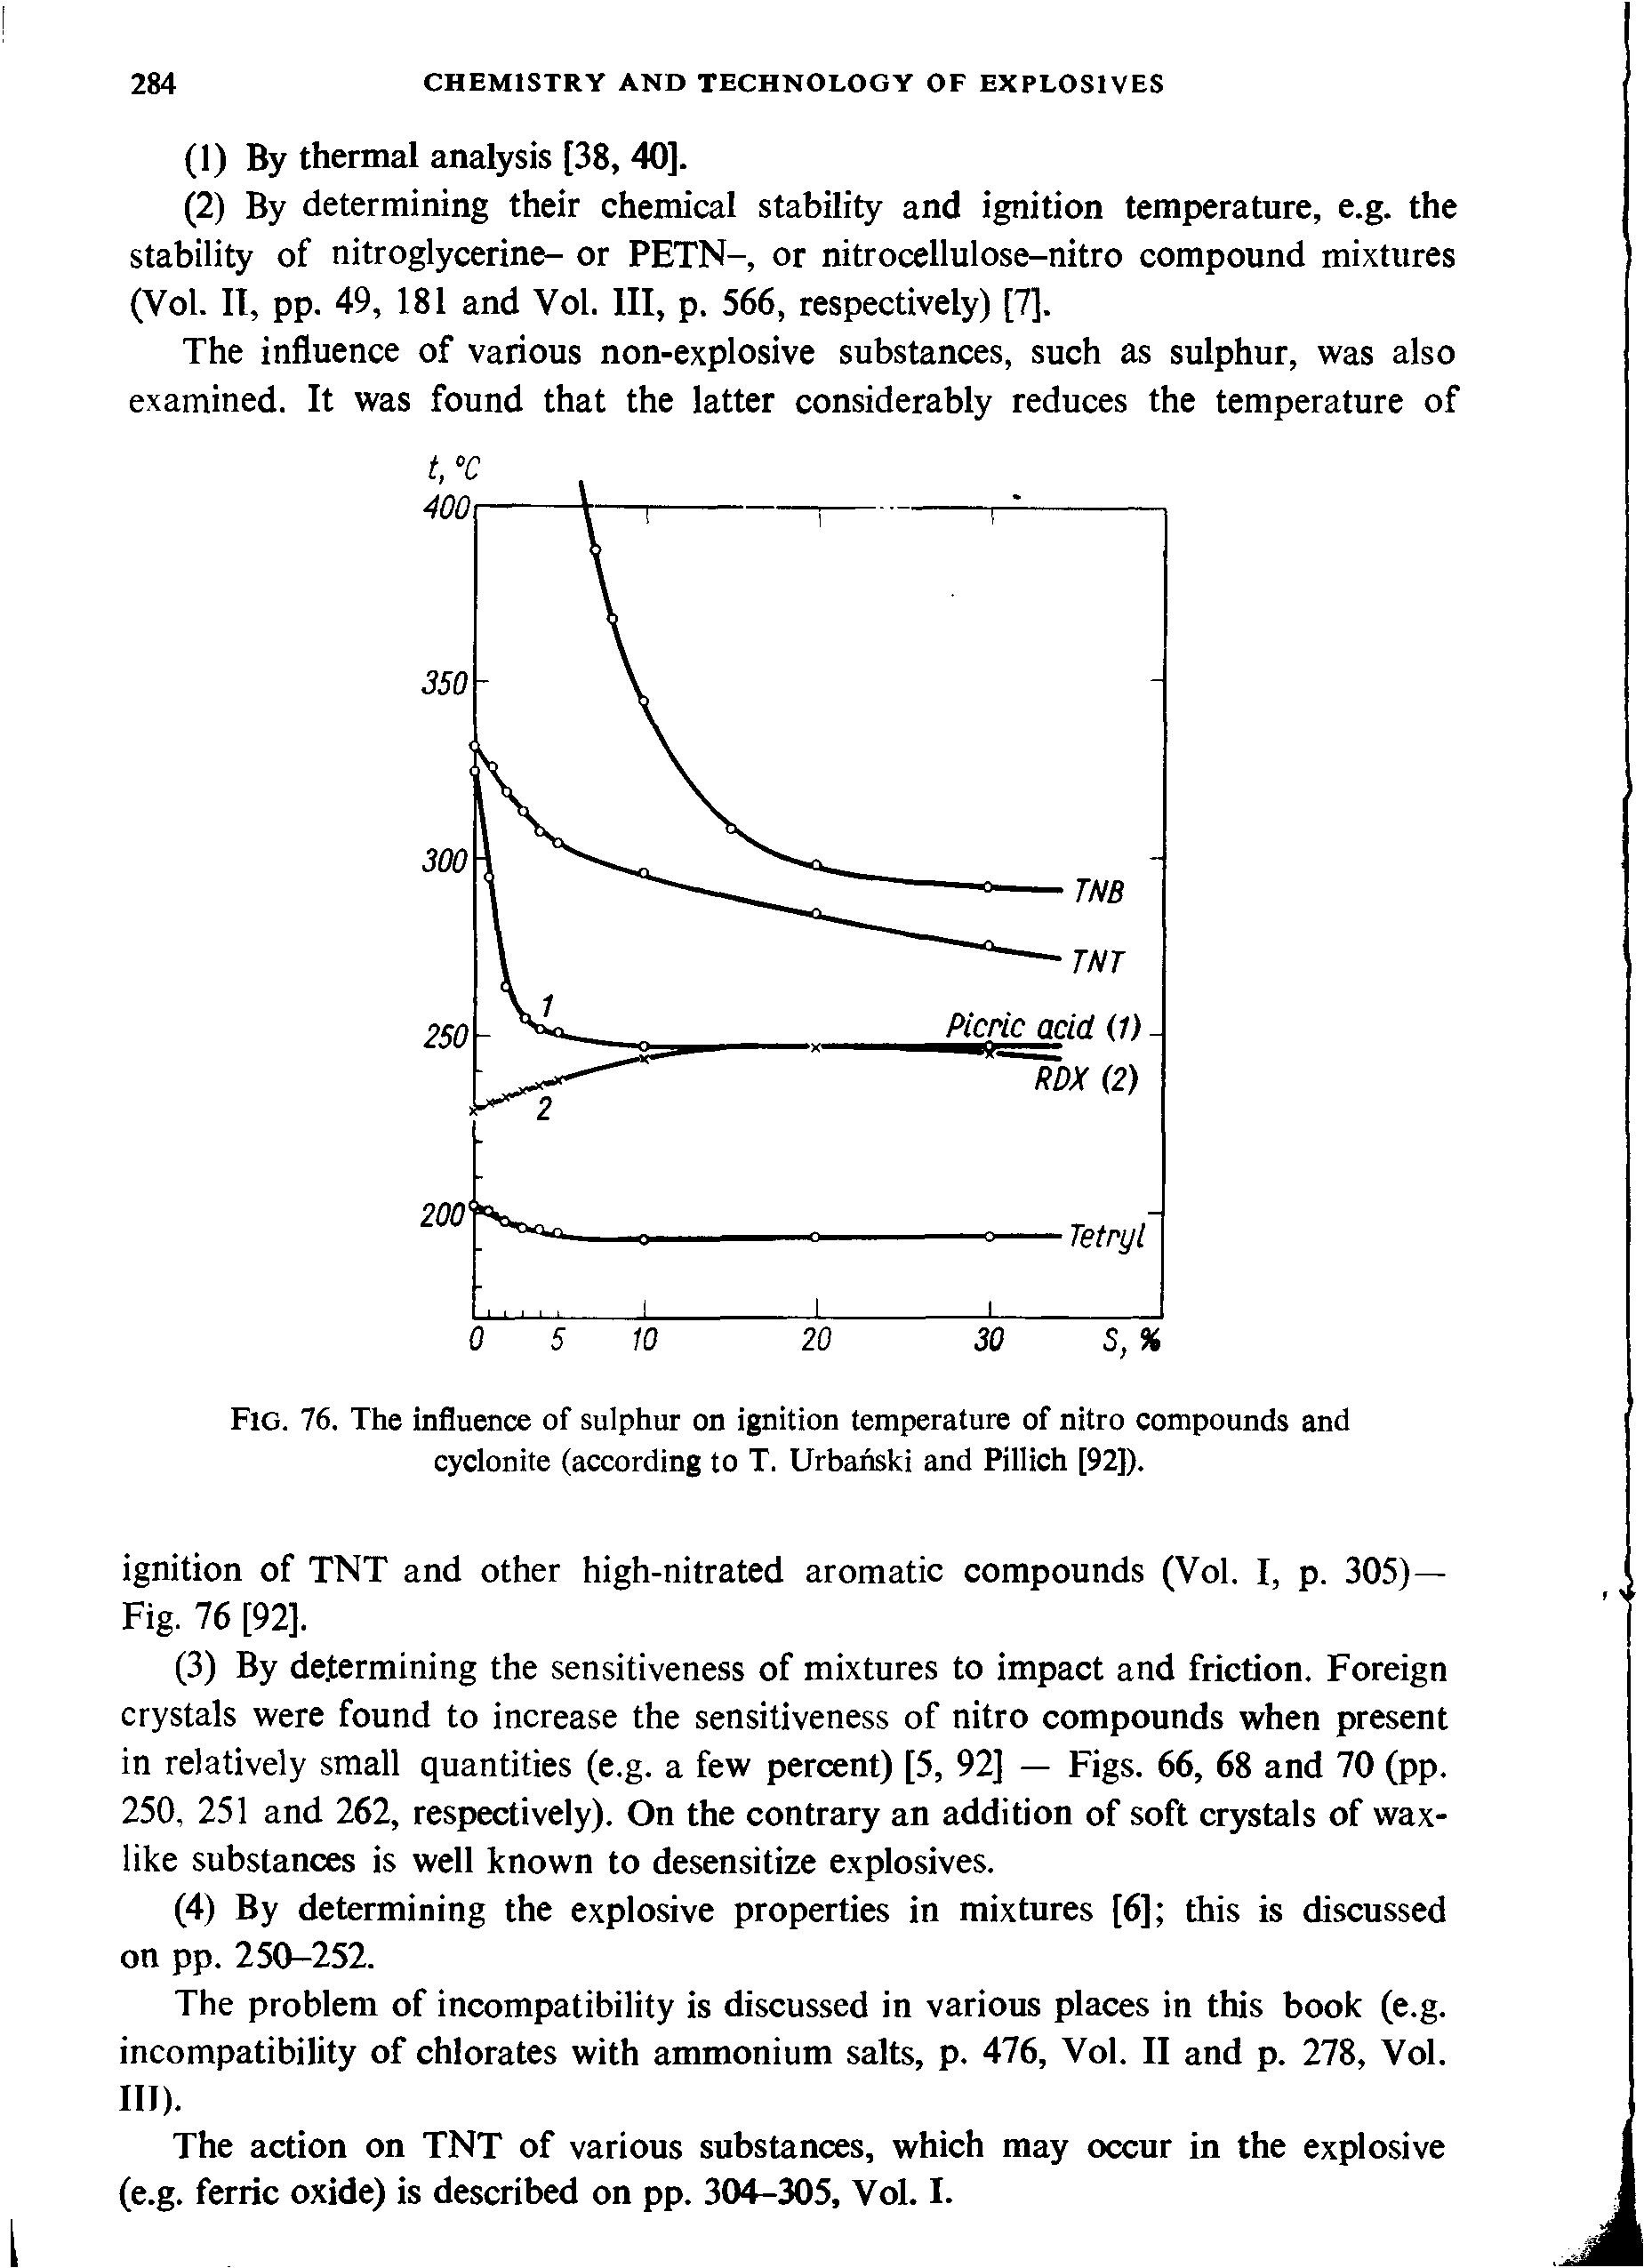 Fig. 76. The influence of sulphur on ignition temperature of nitro compounds and cyclonite (according to T. Urbanski and Pillich [92]).